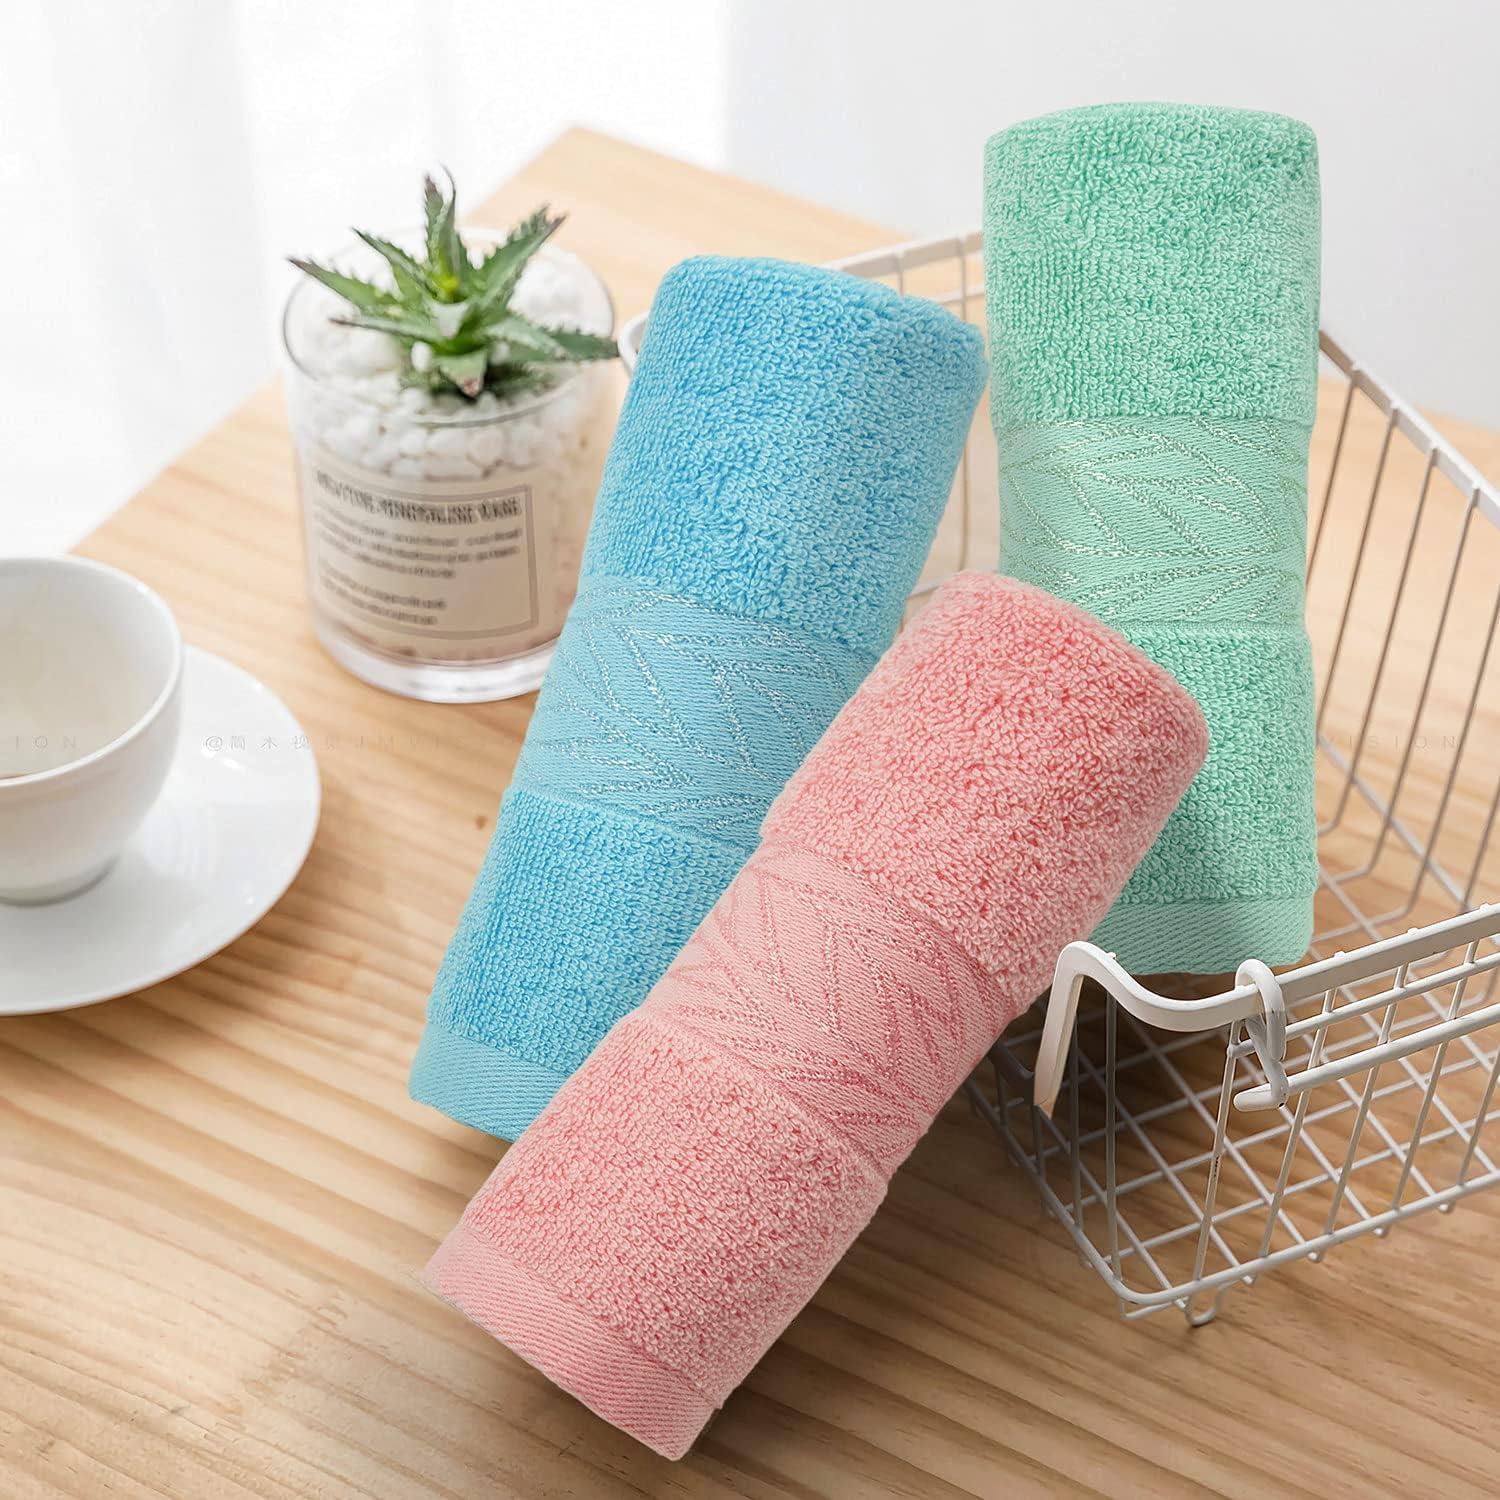 Cleanbear Hand Towels for Bathroom Cotton Hand Towel Set of 6 Ultra Soft  and Hig